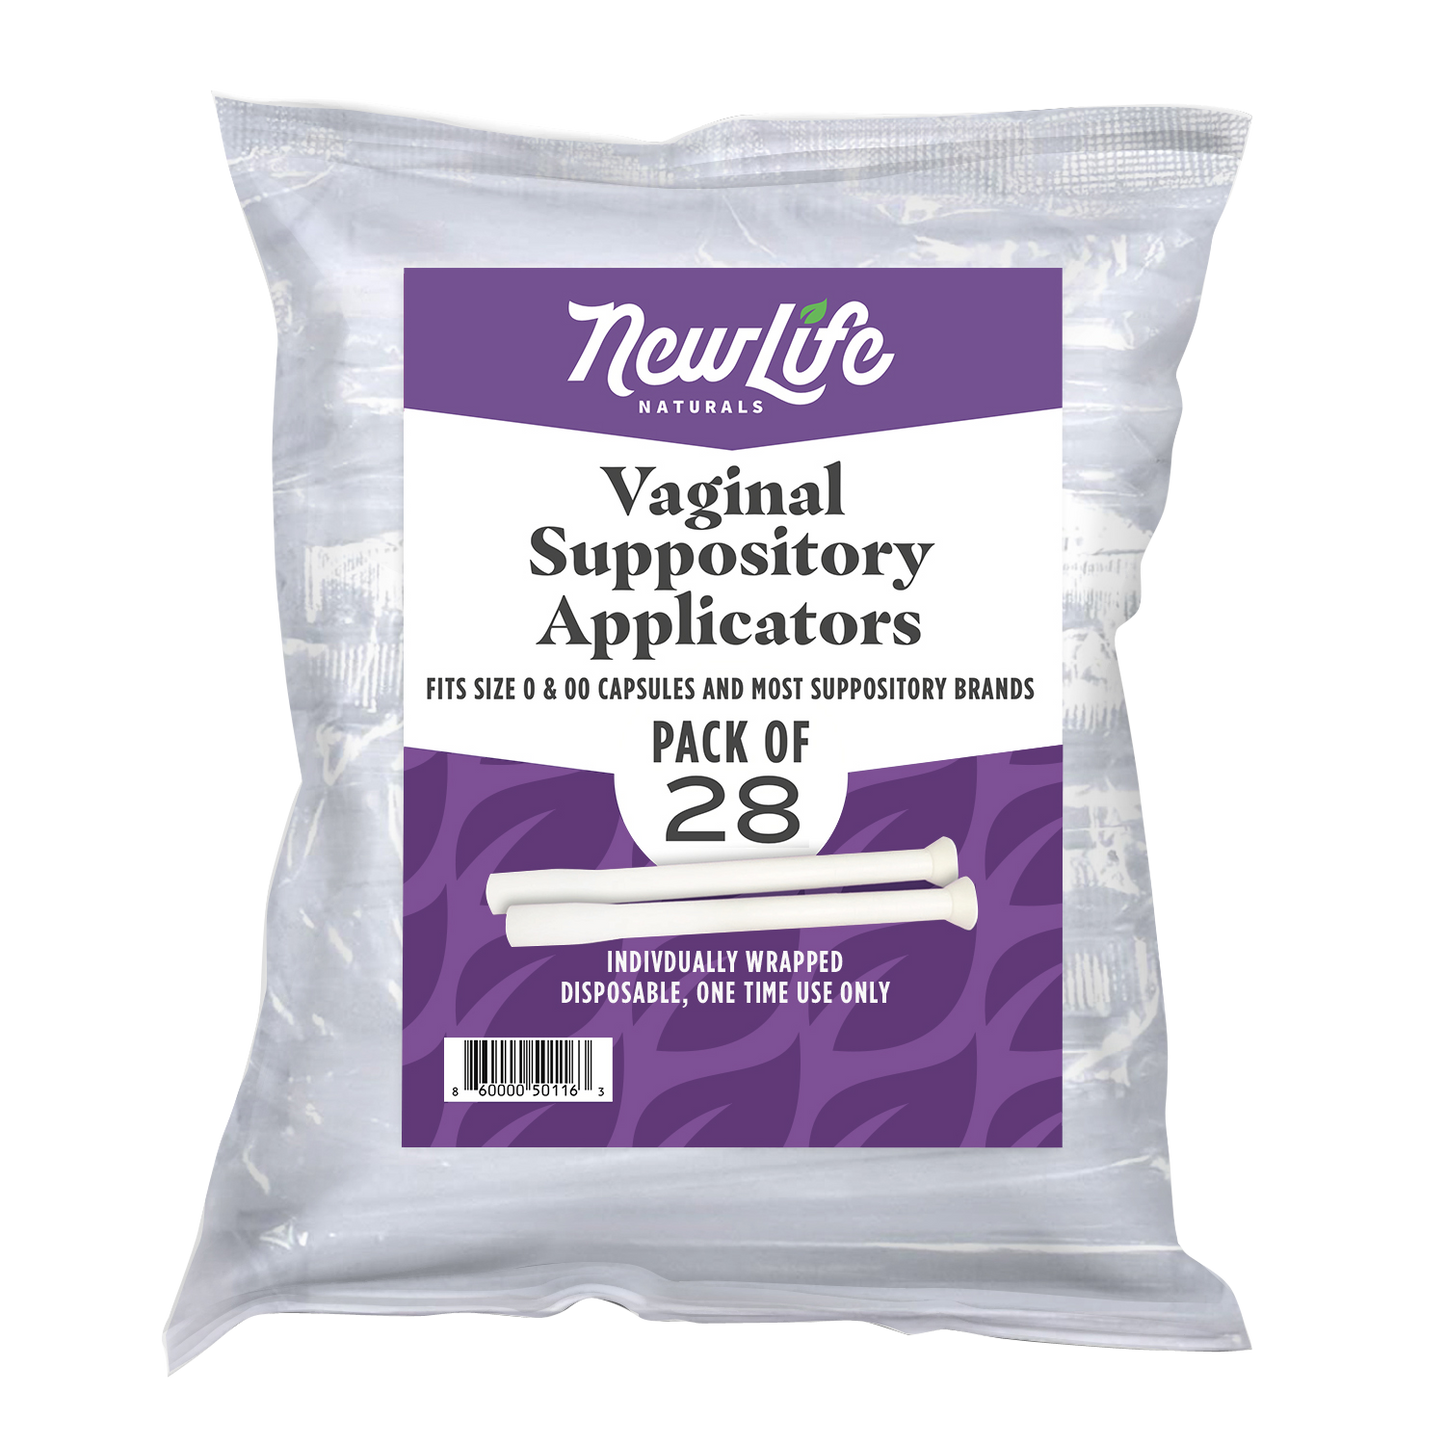 Vaginal Suppository Applicators - 28 Pack